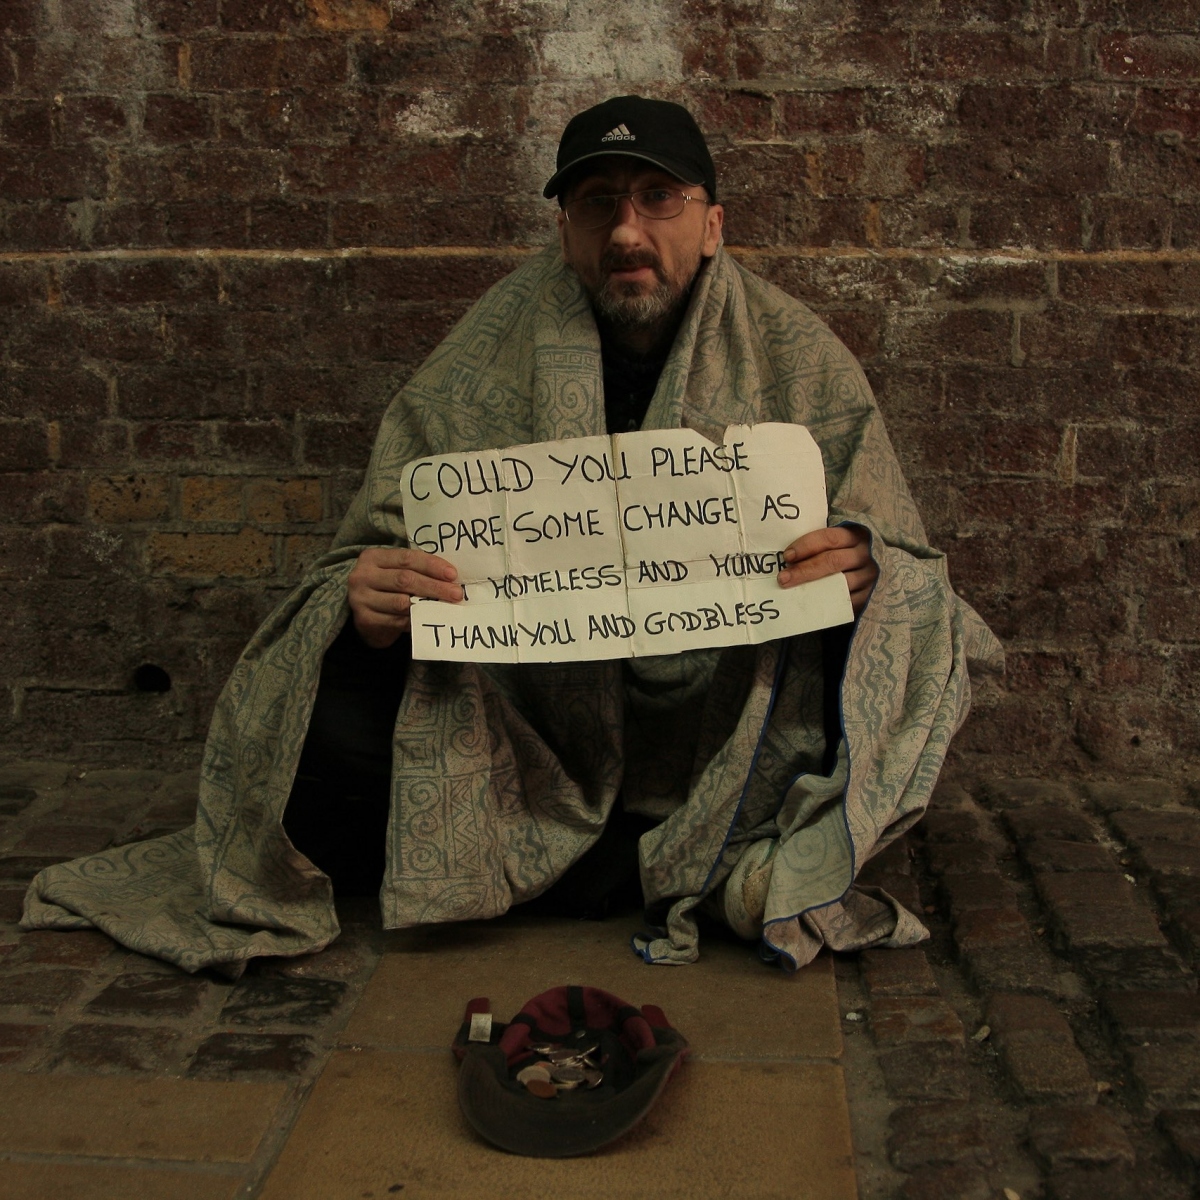 social questions related to homelessmess